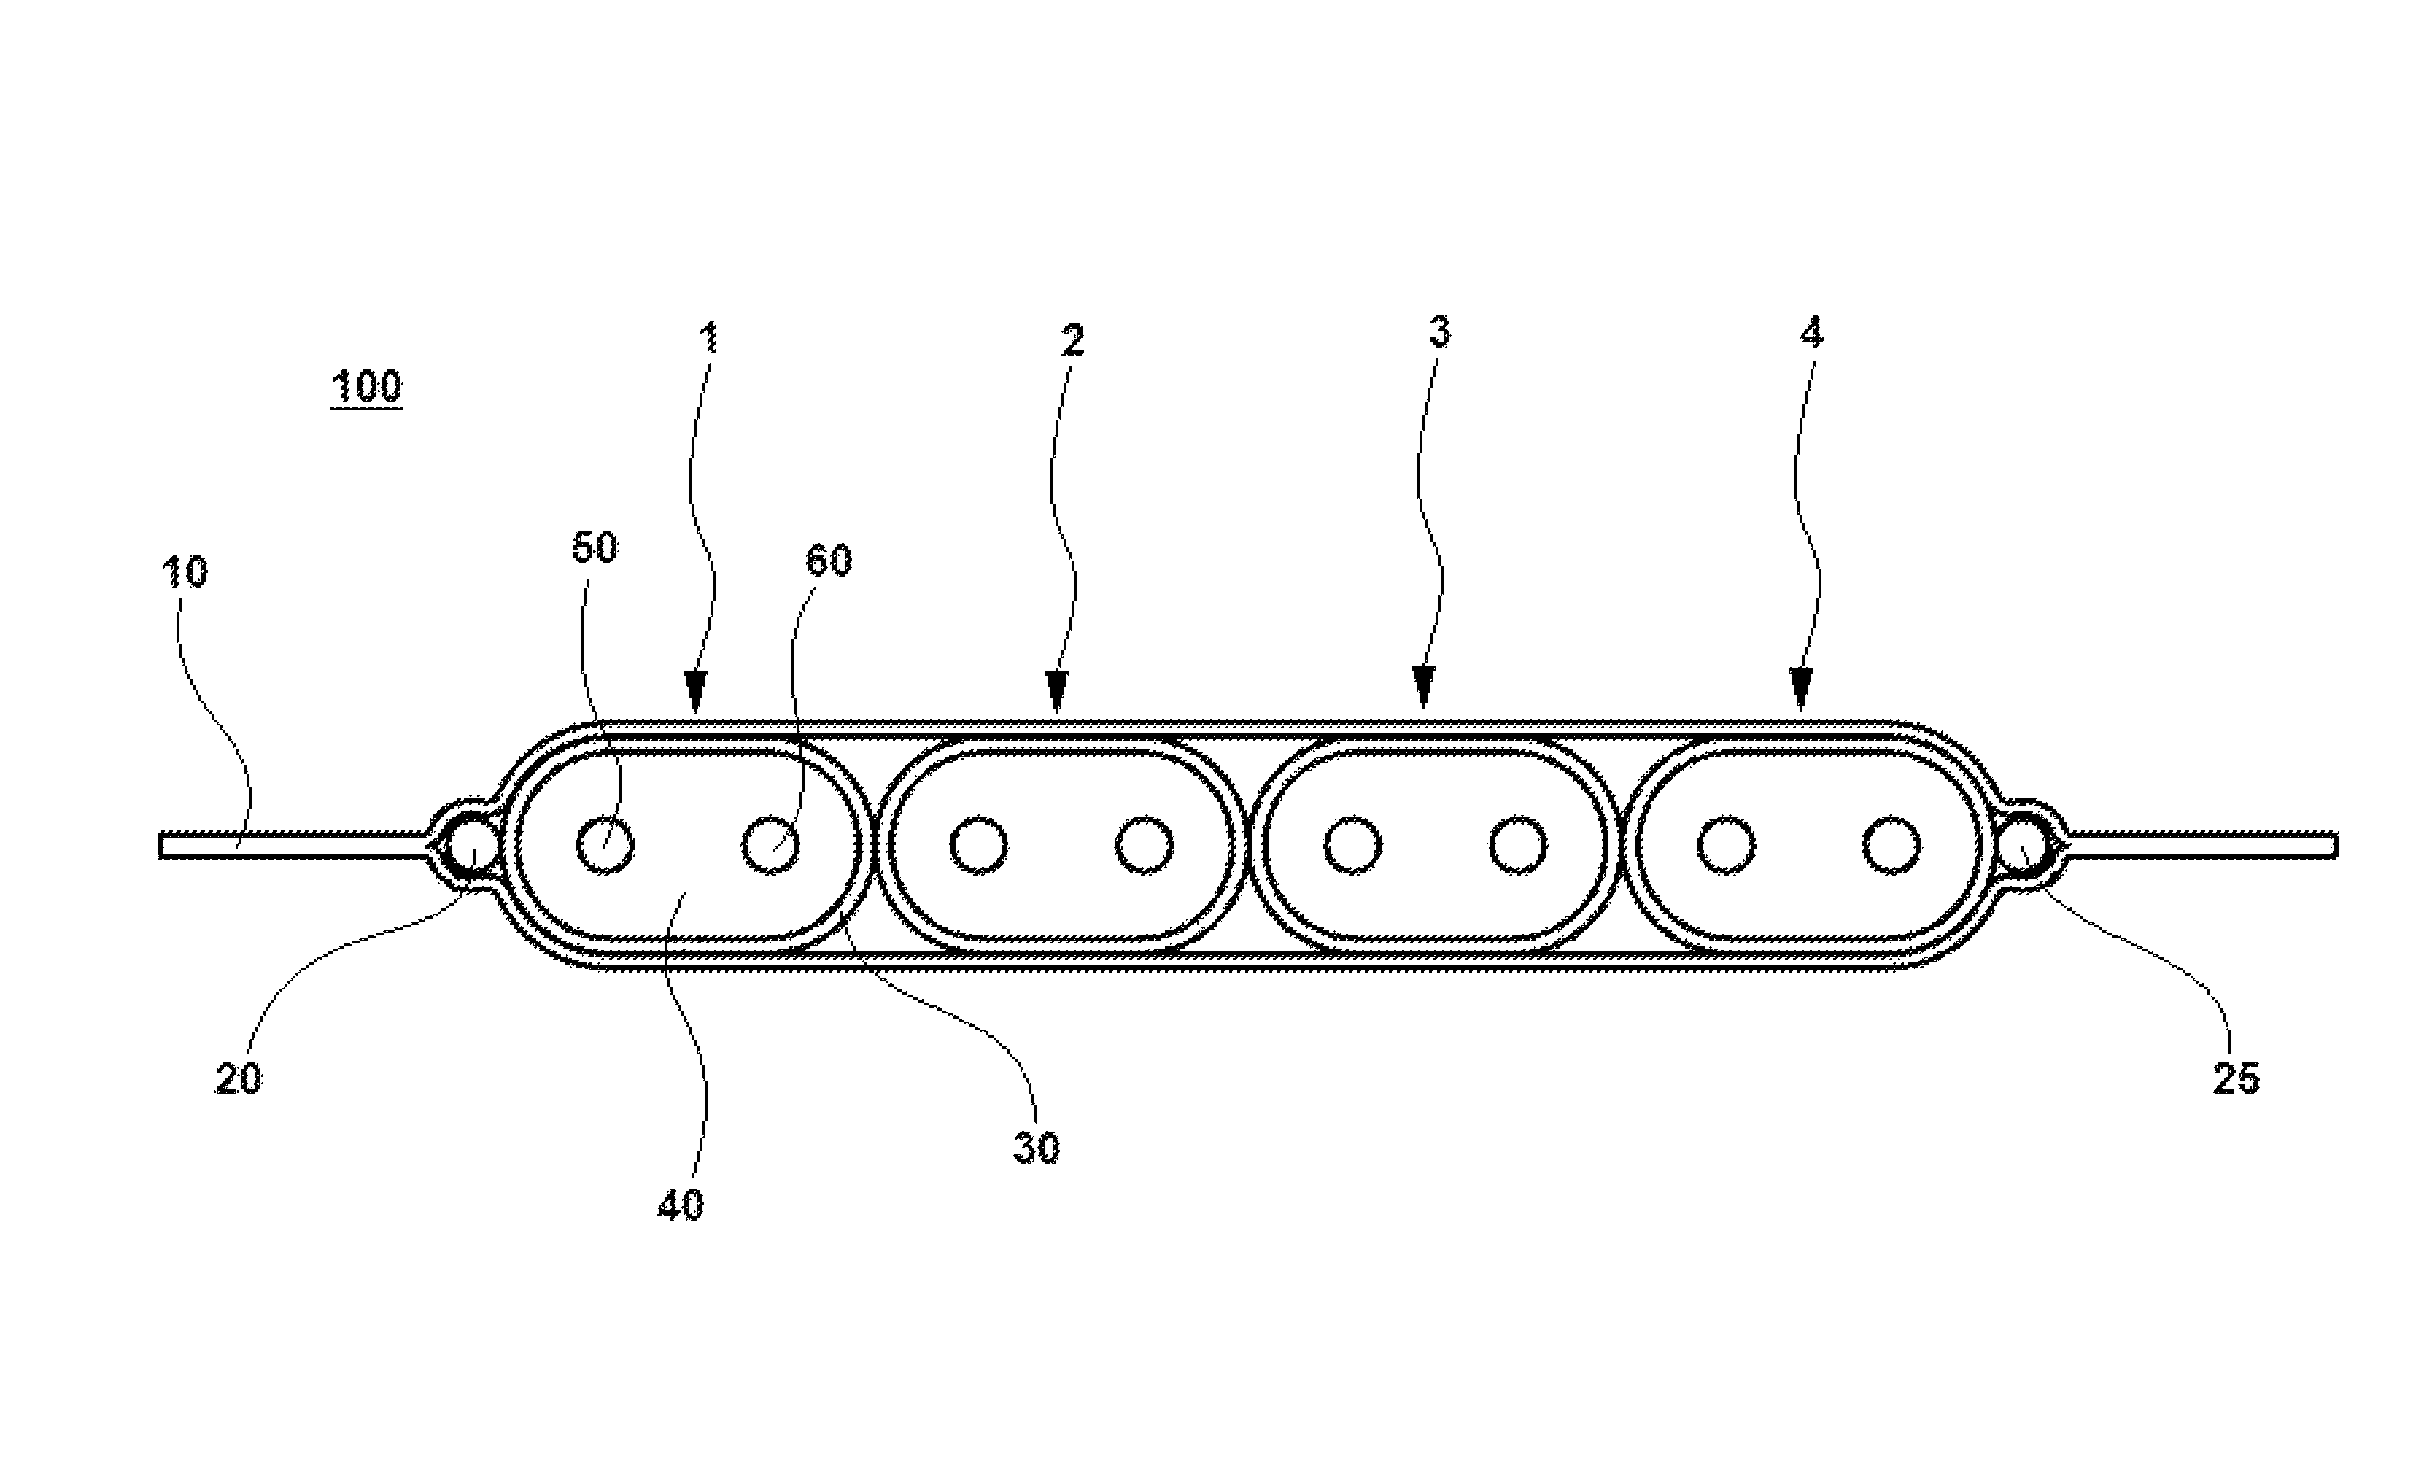 Twinaxial cable and twinaxial cable ribbon